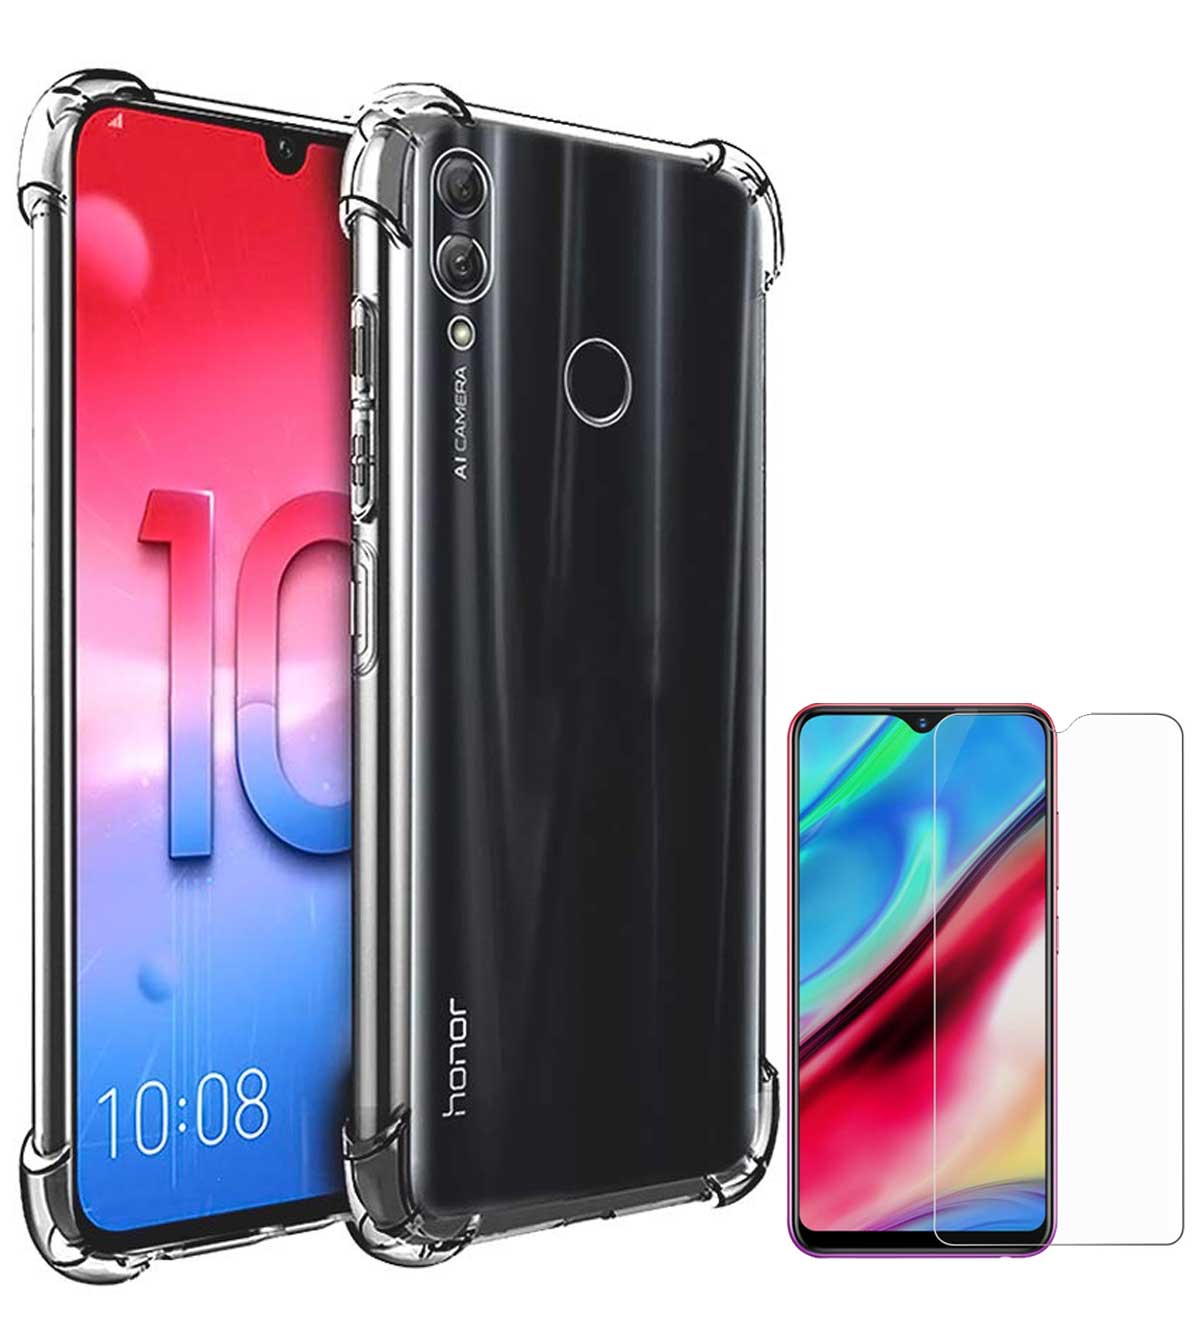 RRTBZ Soft Silicone Bumper Hard Transparent Back Cover for Huawei Honor 10 Lite with Tempered Screen Guard